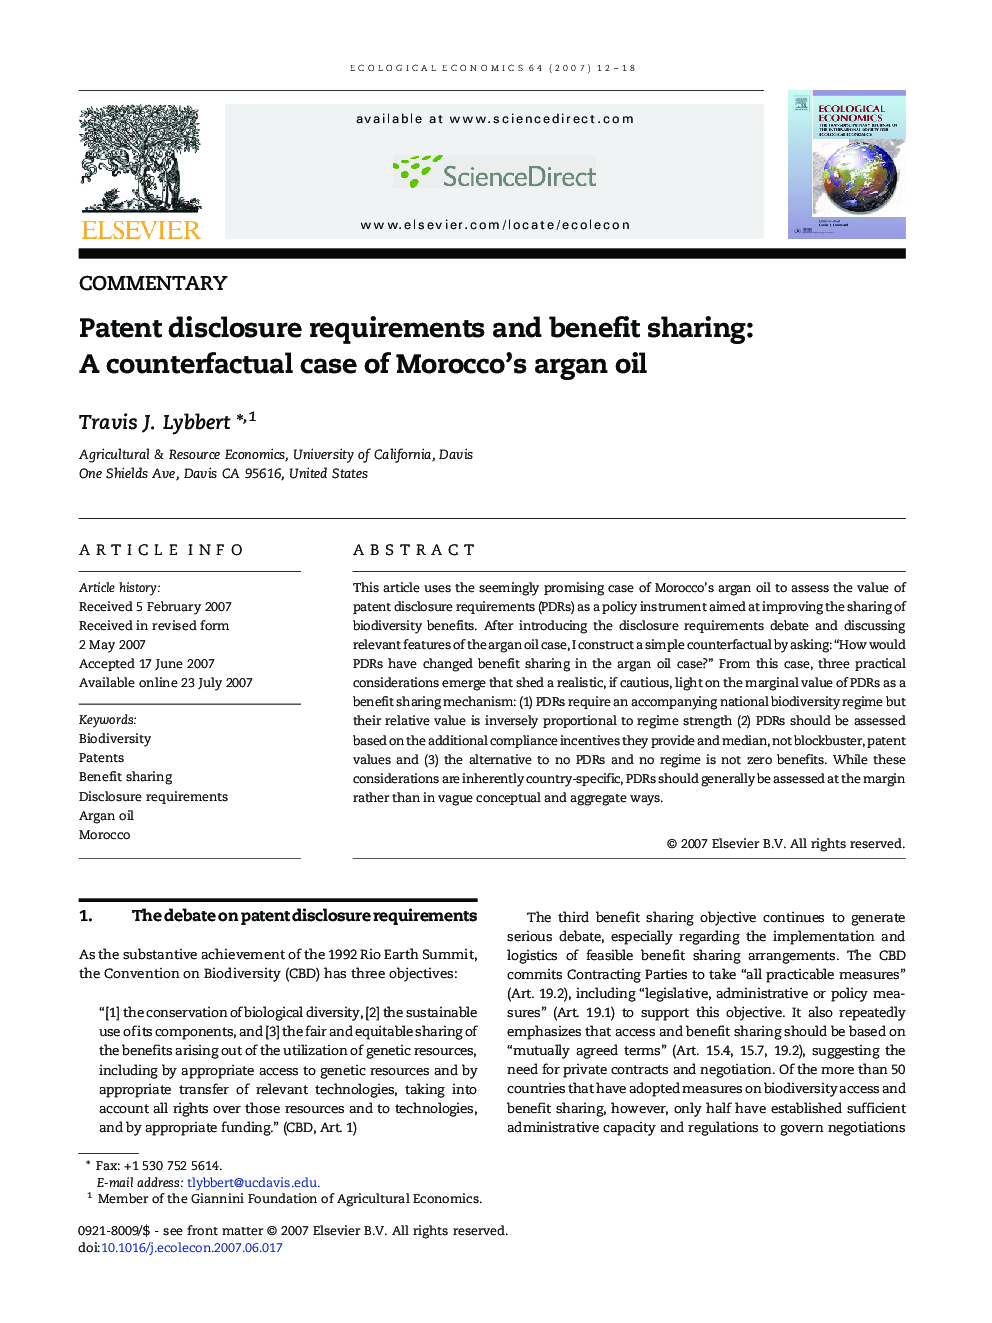 Patent disclosure requirements and benefit sharing: A counterfactual case of Morocco's argan oil